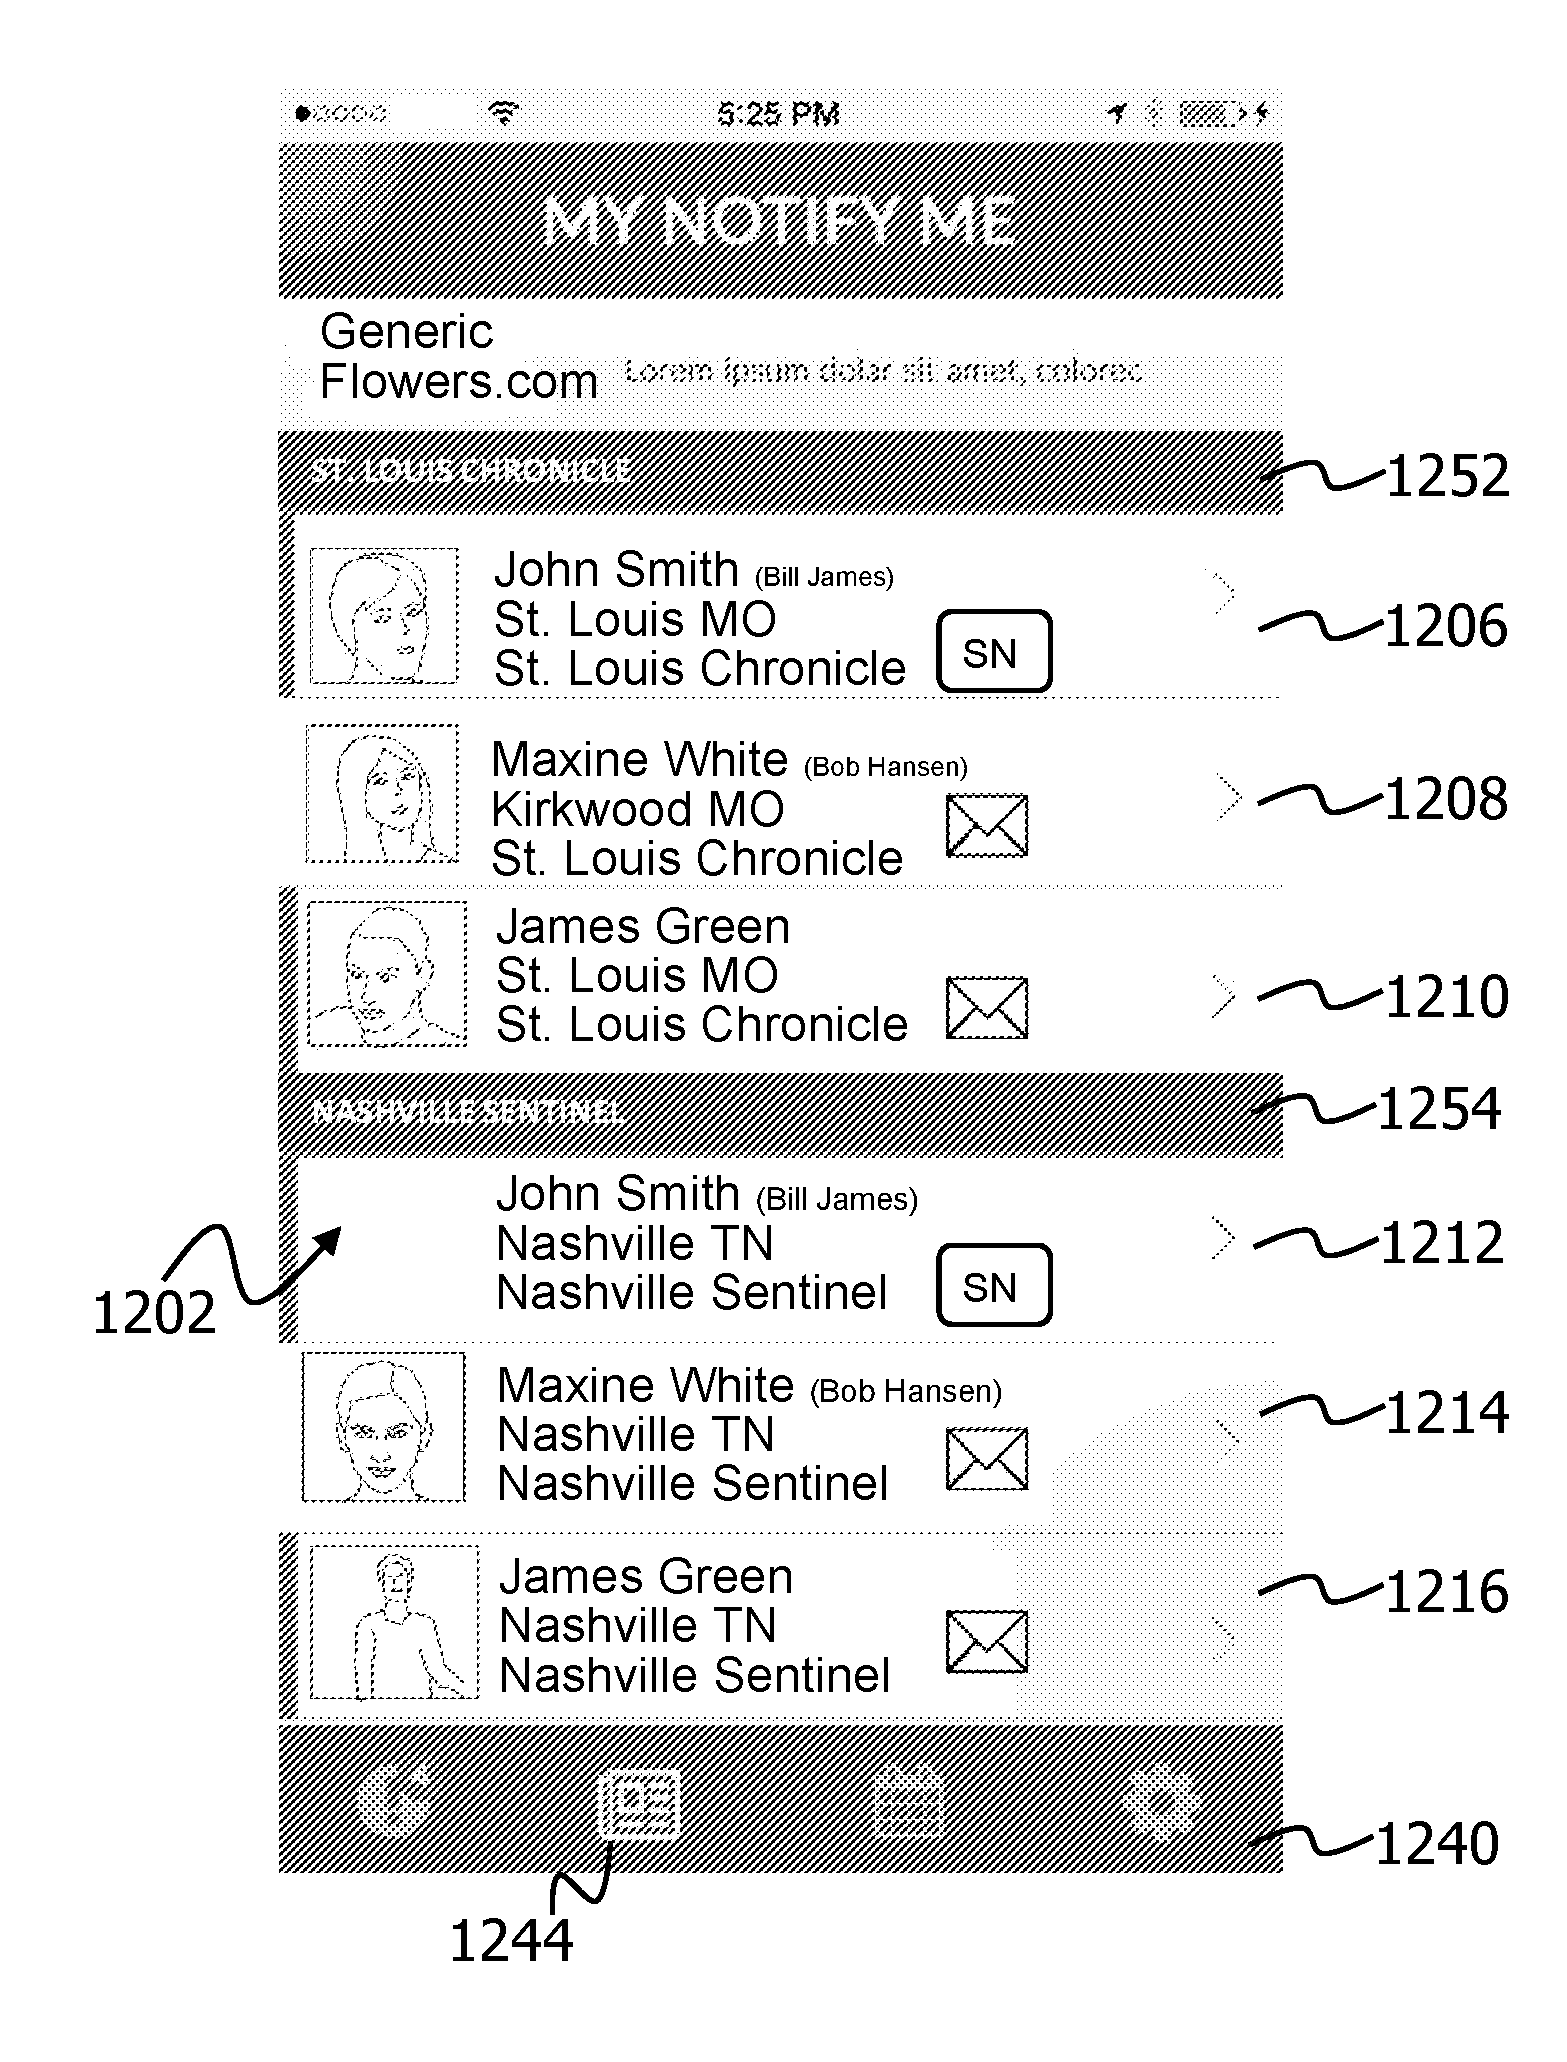 Systems and methods for notifying a user of life events experienced by contacts of the user